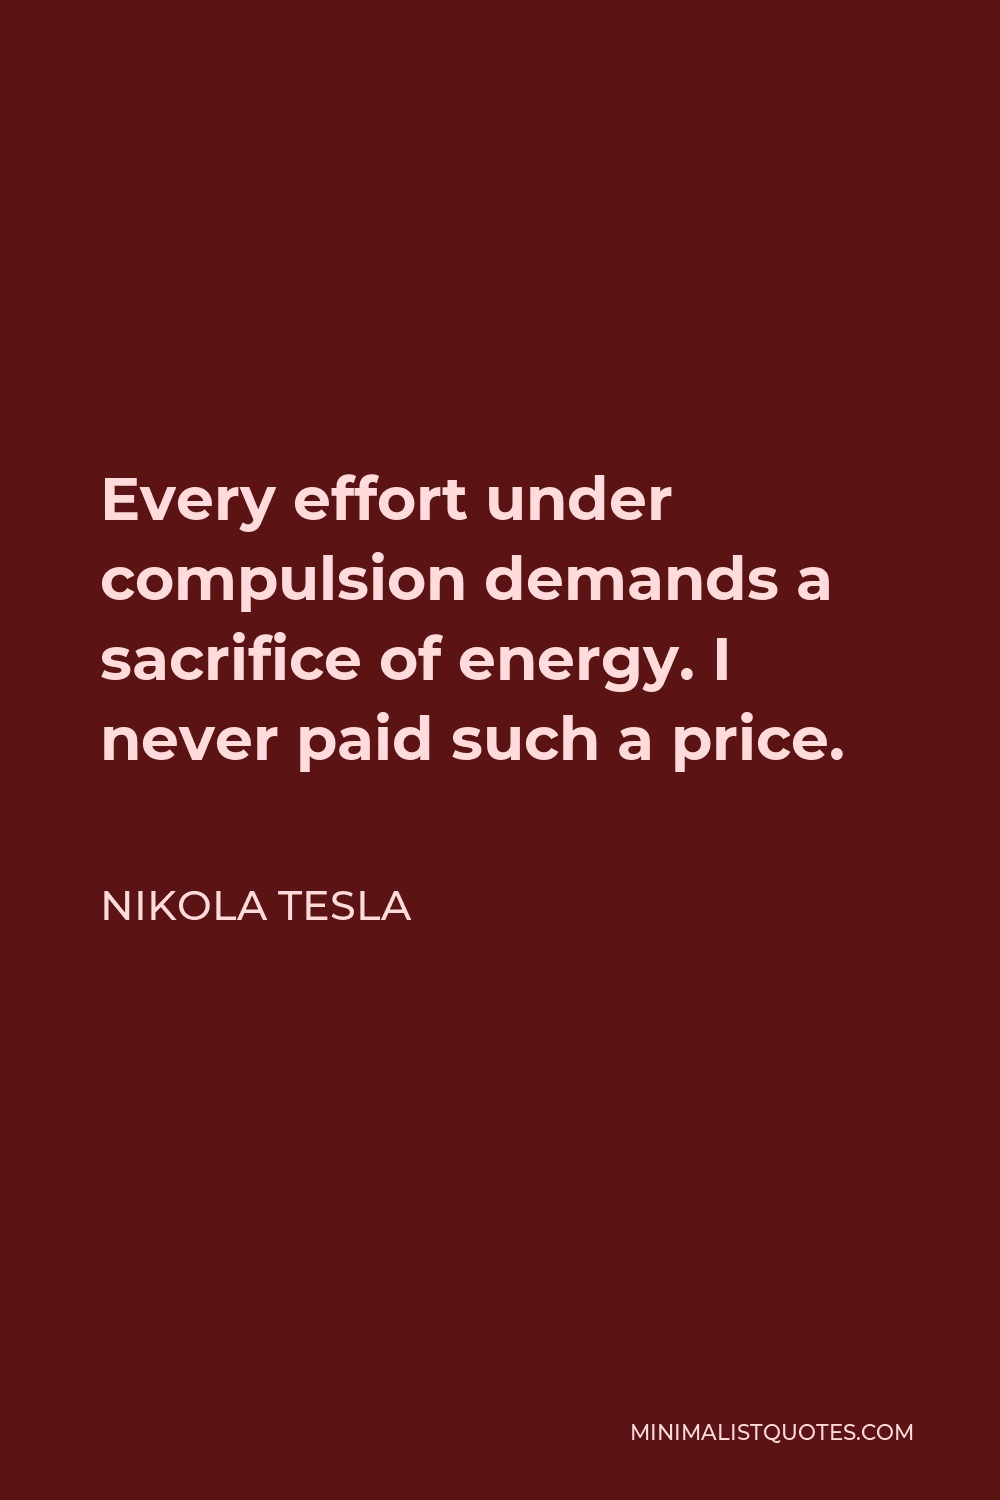 Nikola Tesla Quote - Every effort under compulsion demands a sacrifice of energy. I never paid such a price.